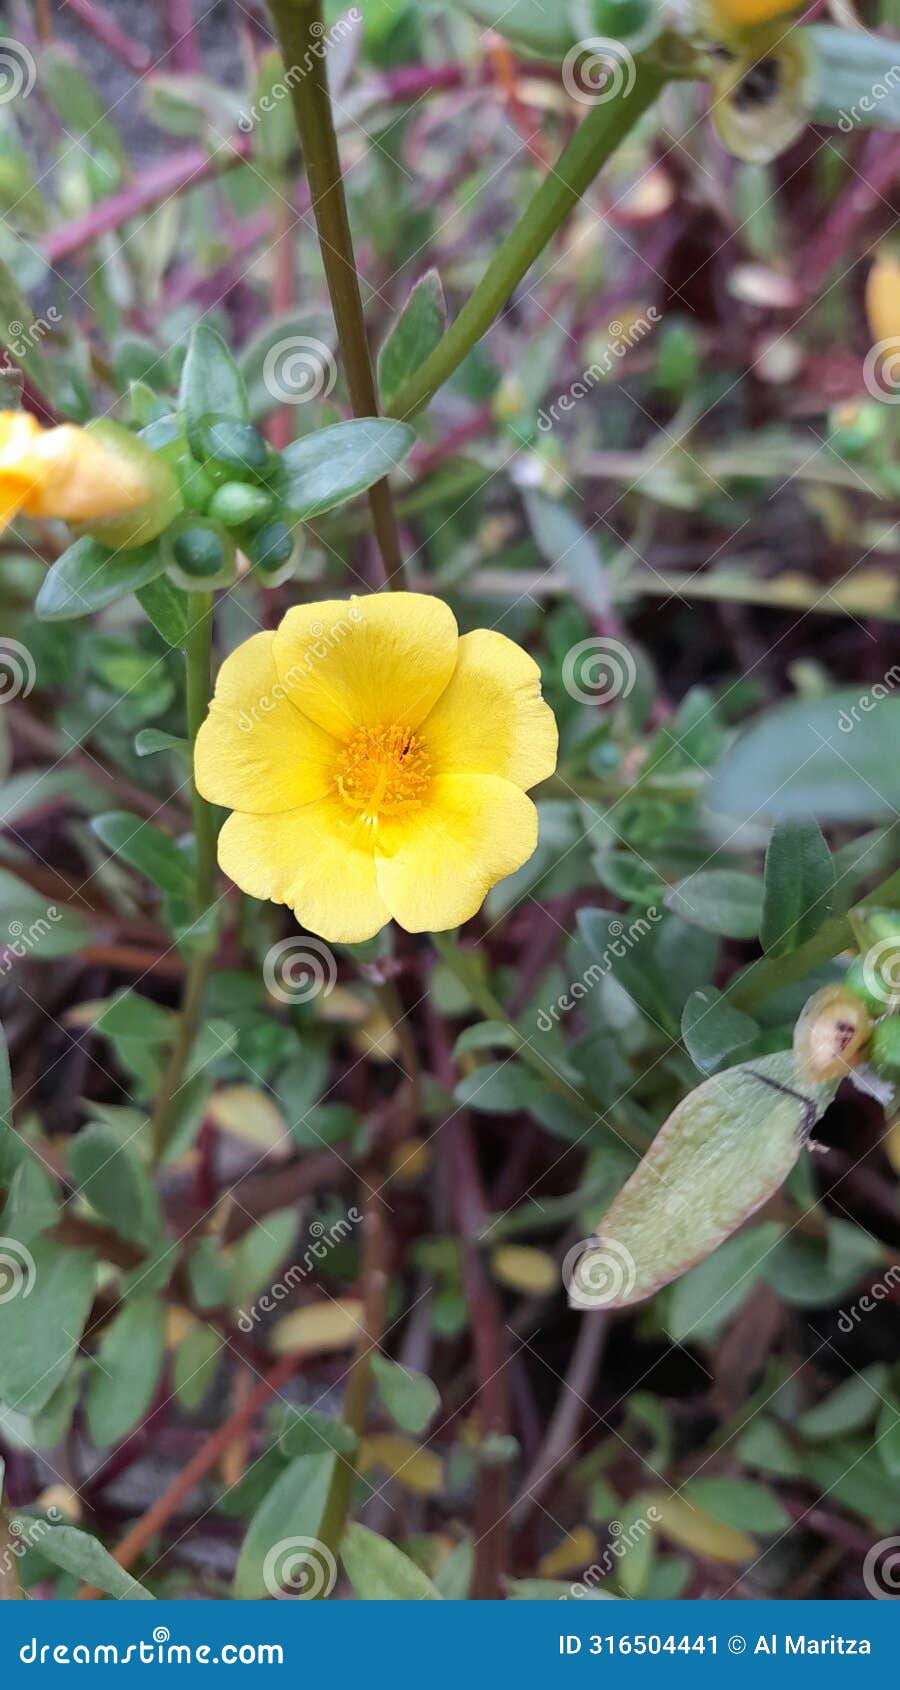 yellow flower - beauty of nature